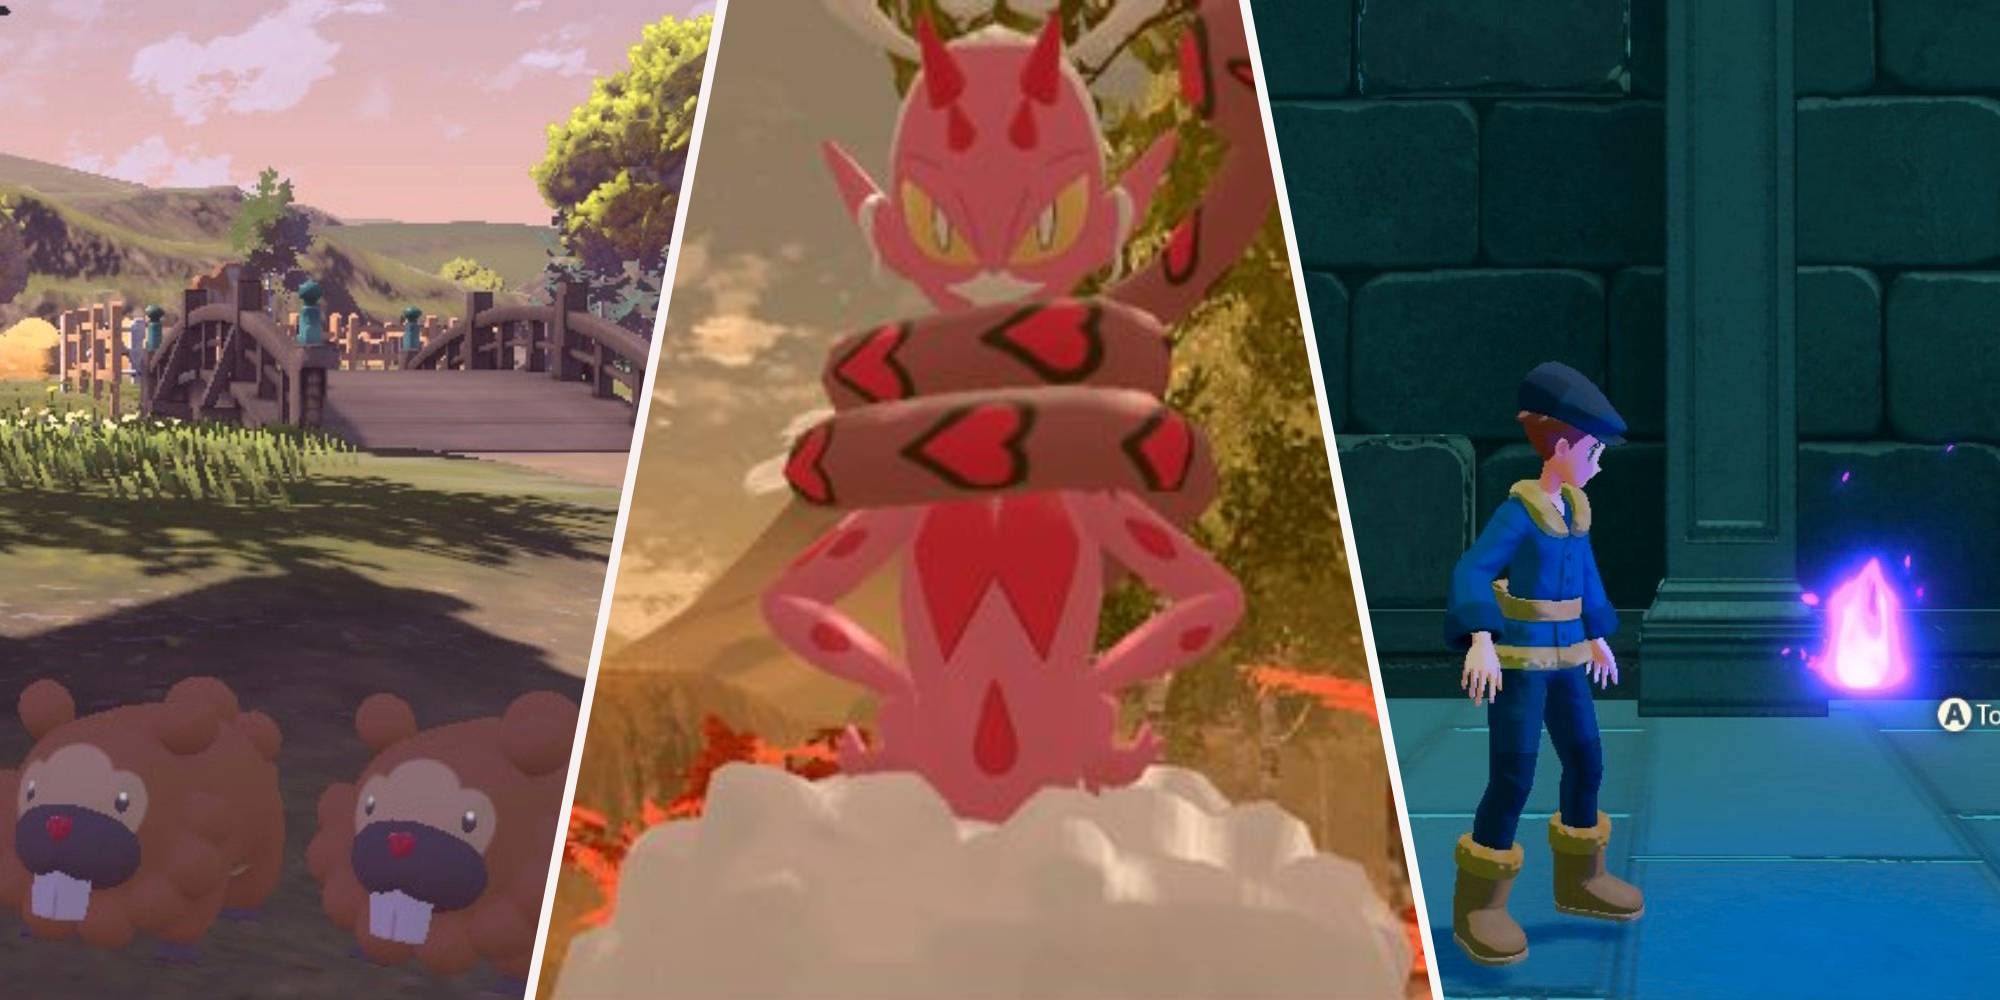 Pokémon Legends Arceus walkthrough and guide: All main Arceus missions and  objectives listed